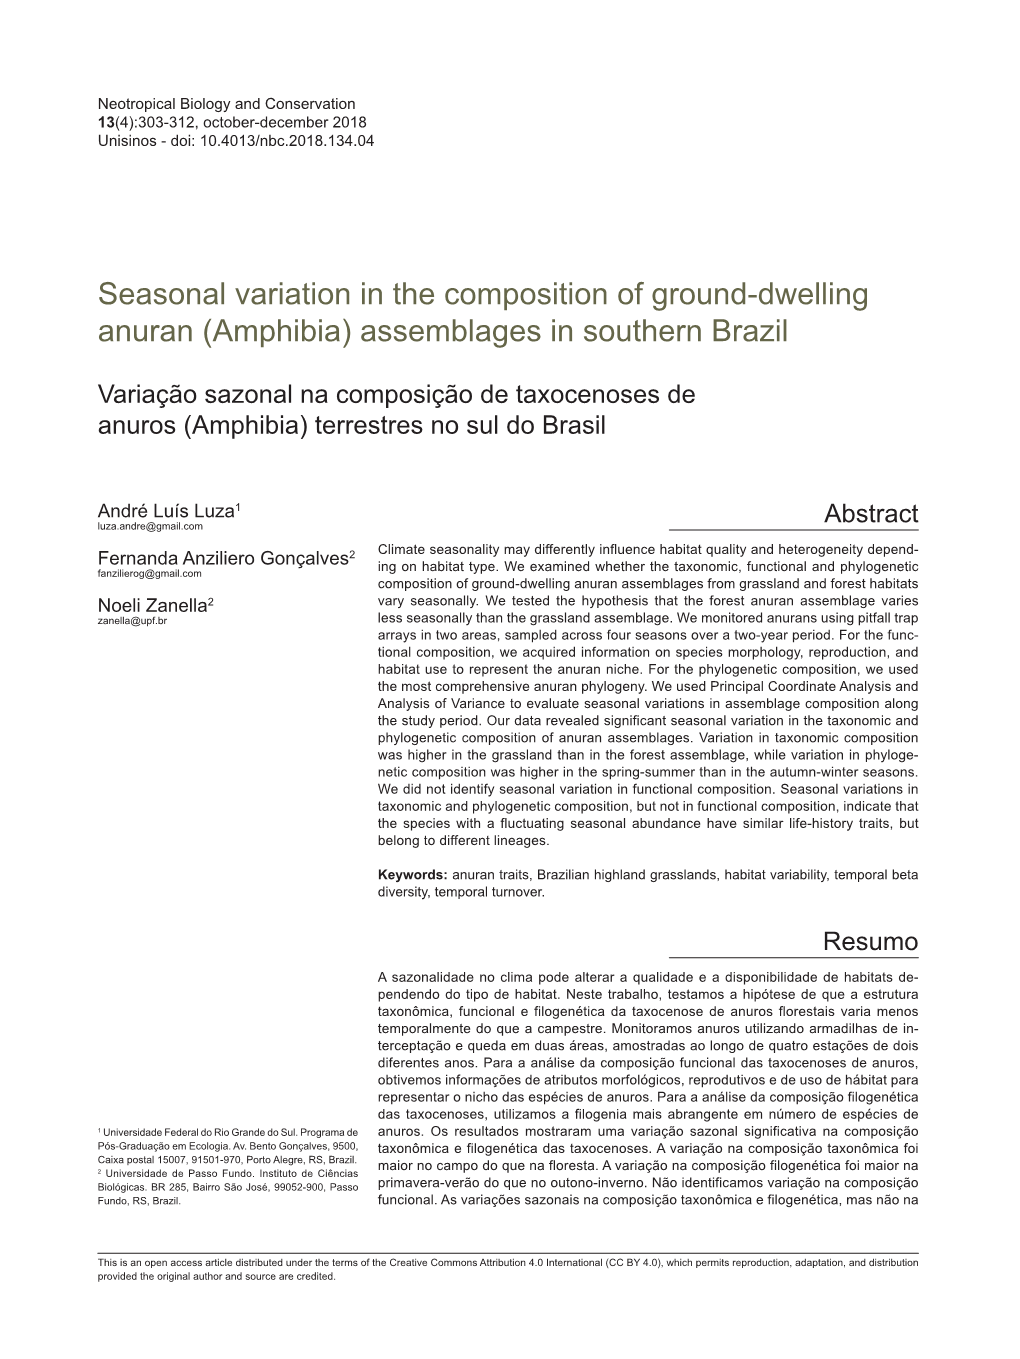 Seasonal Variation in the Composition of Ground-Dwelling Anuran (Amphibia) Assemblages in Southern Brazil